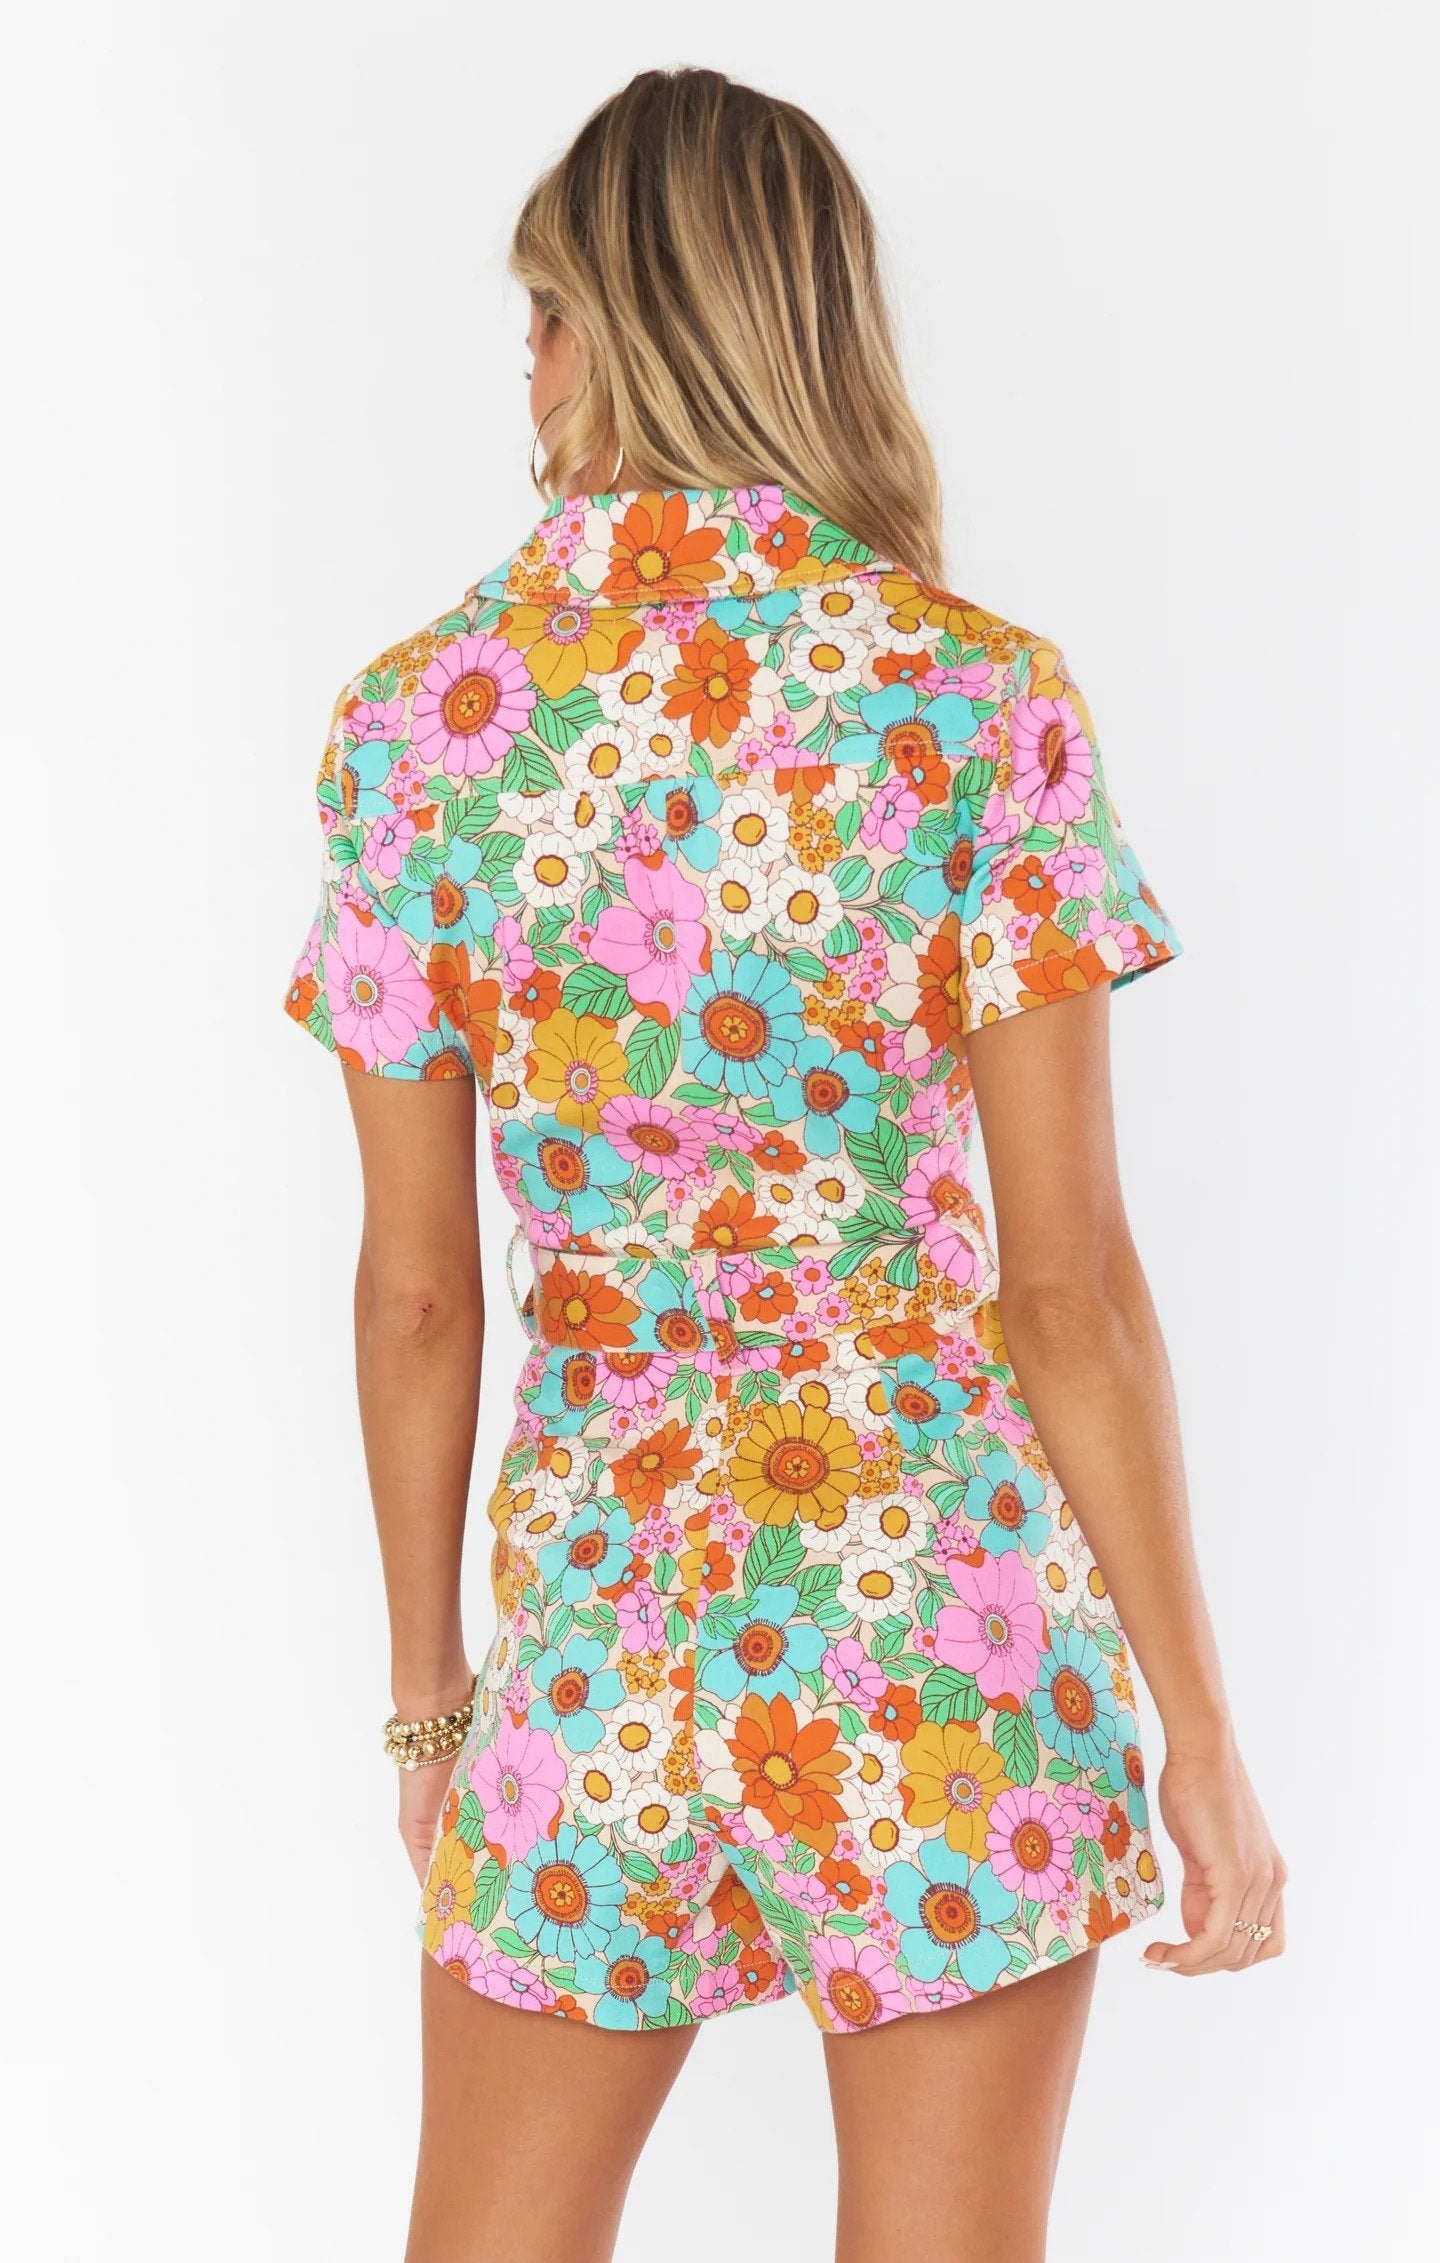 Show Me Your MuMu Floral Outlaw Romper